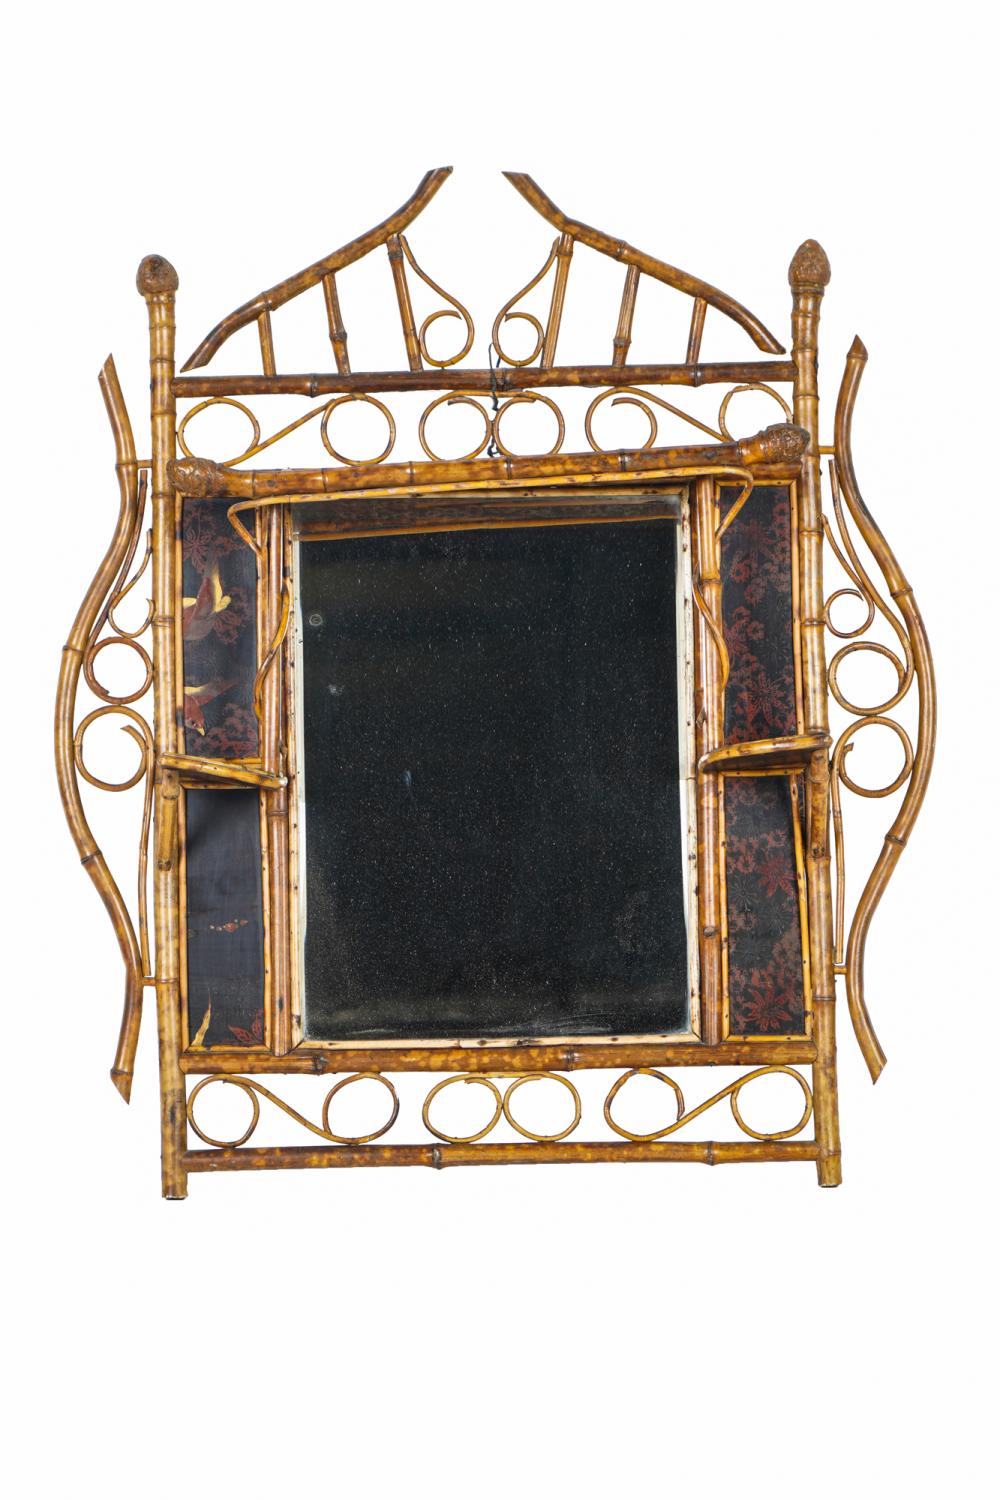 FRENCH LACQUERED BAMBOO WALL MIRRORthe